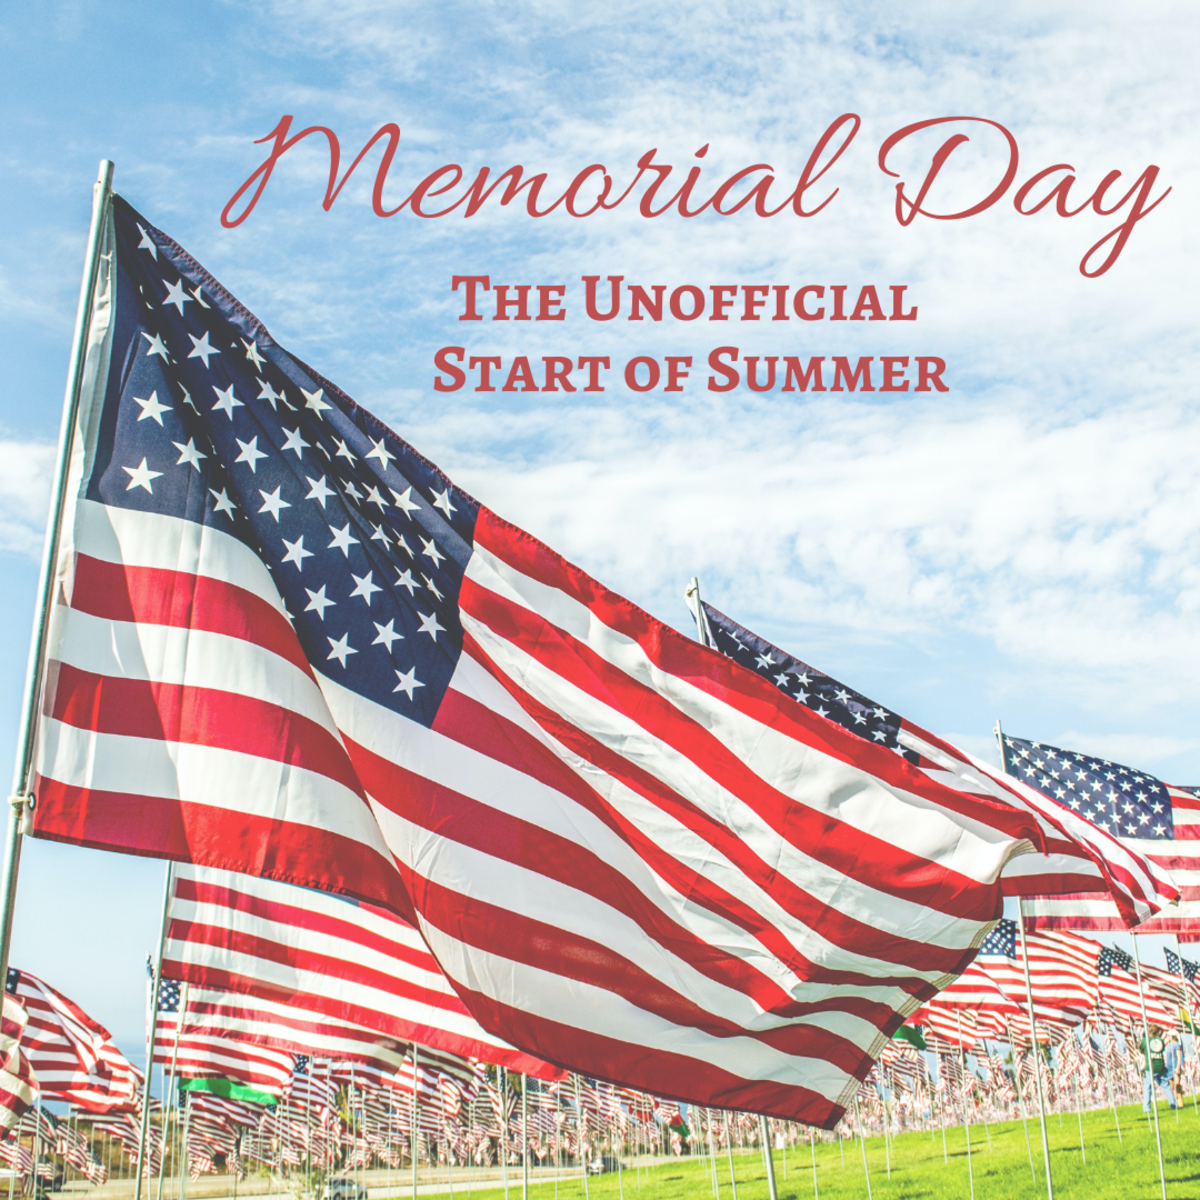 Most people consider Memorial Day to be the unofficial start to summer.